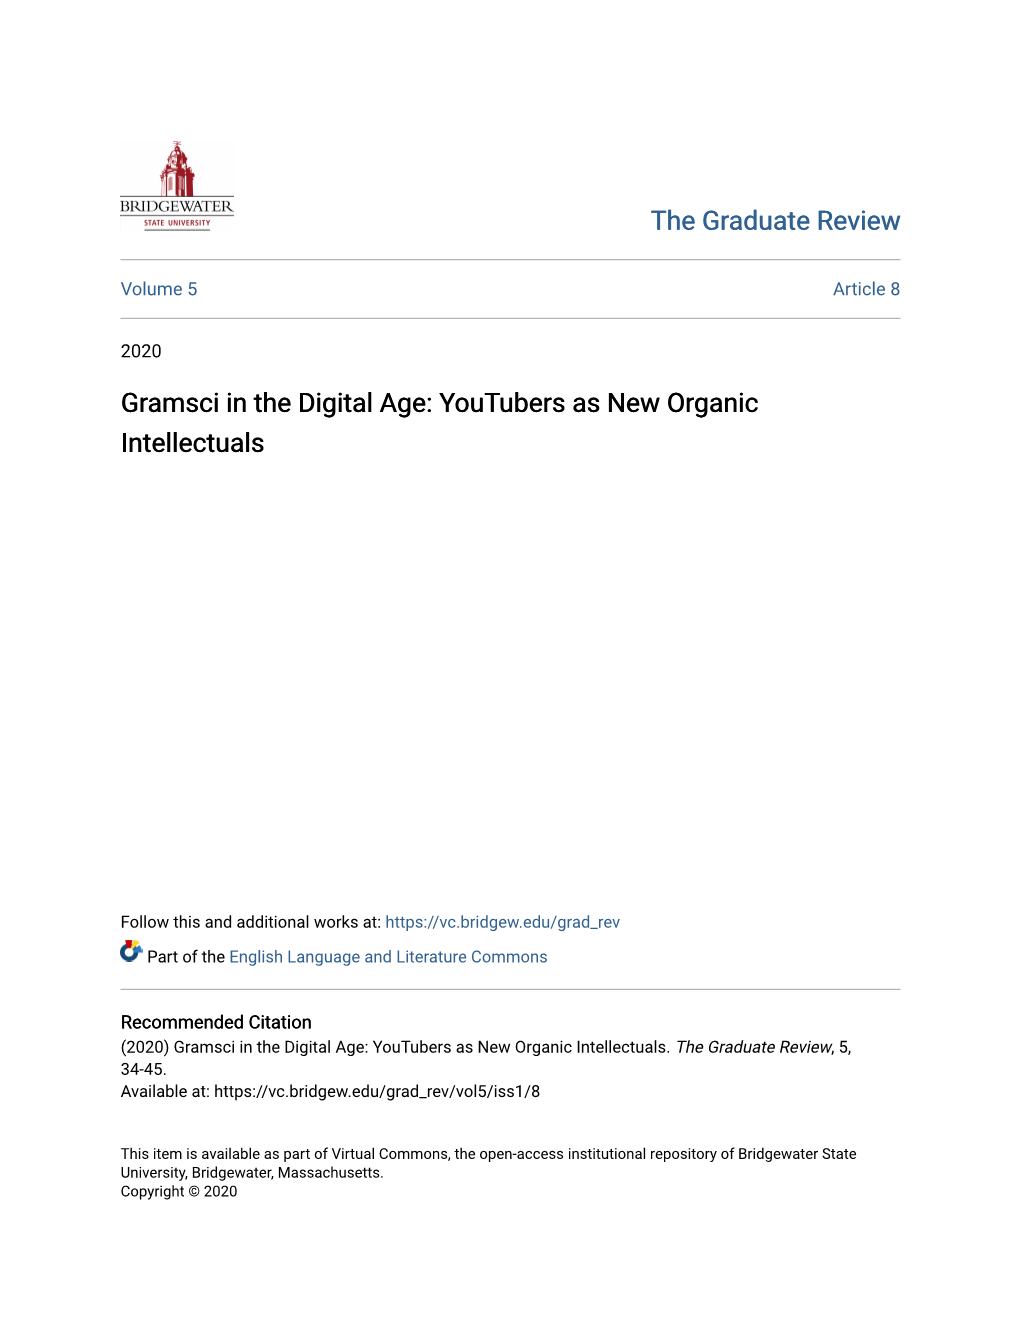 Gramsci in the Digital Age: Youtubers As New Organic Intellectuals